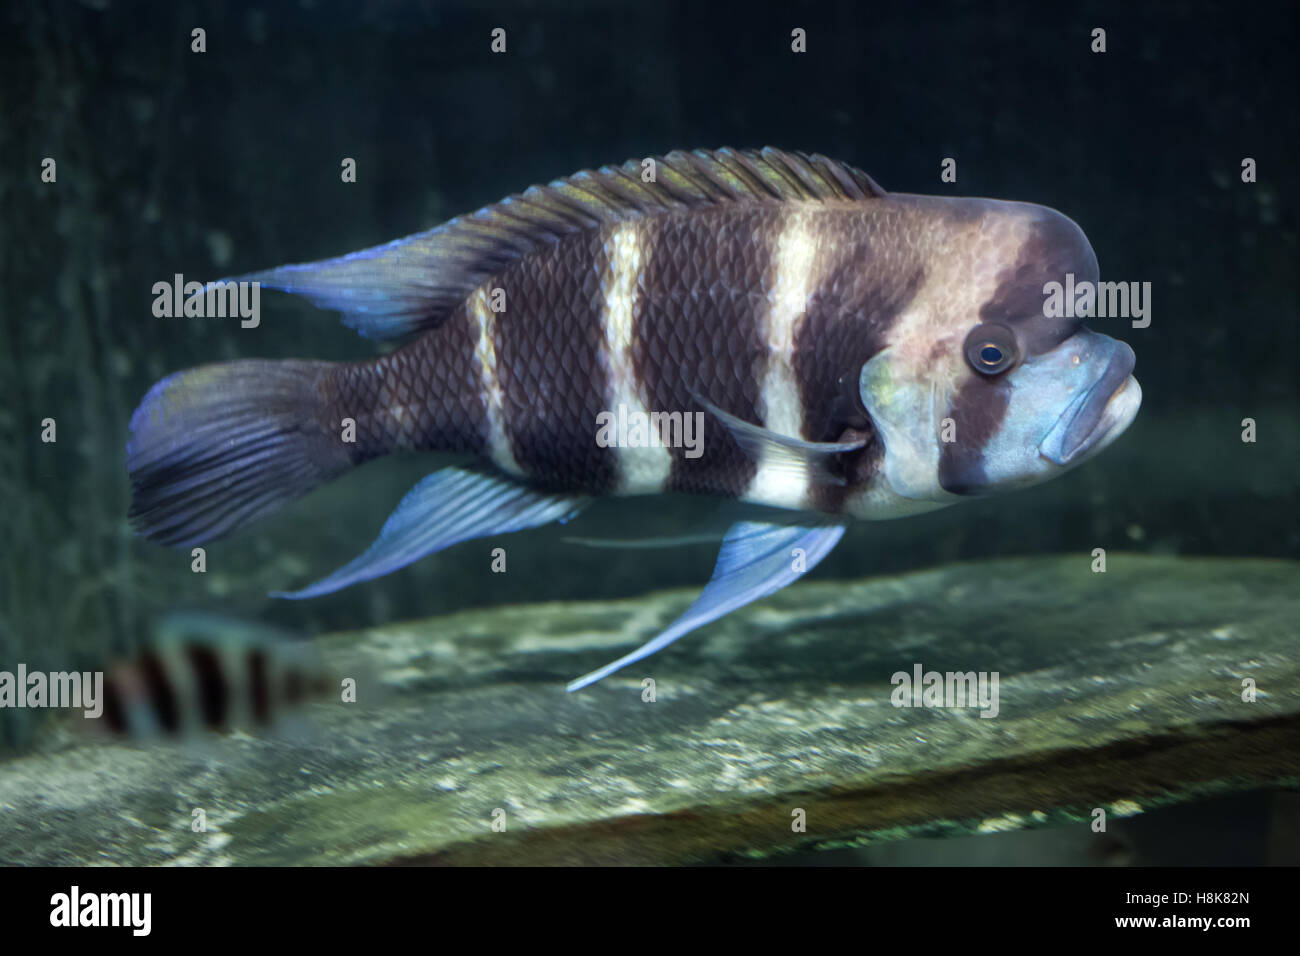 Frontosa (Cyphotilapia frontosa), also known as the humphead cichlid. Stock Photo